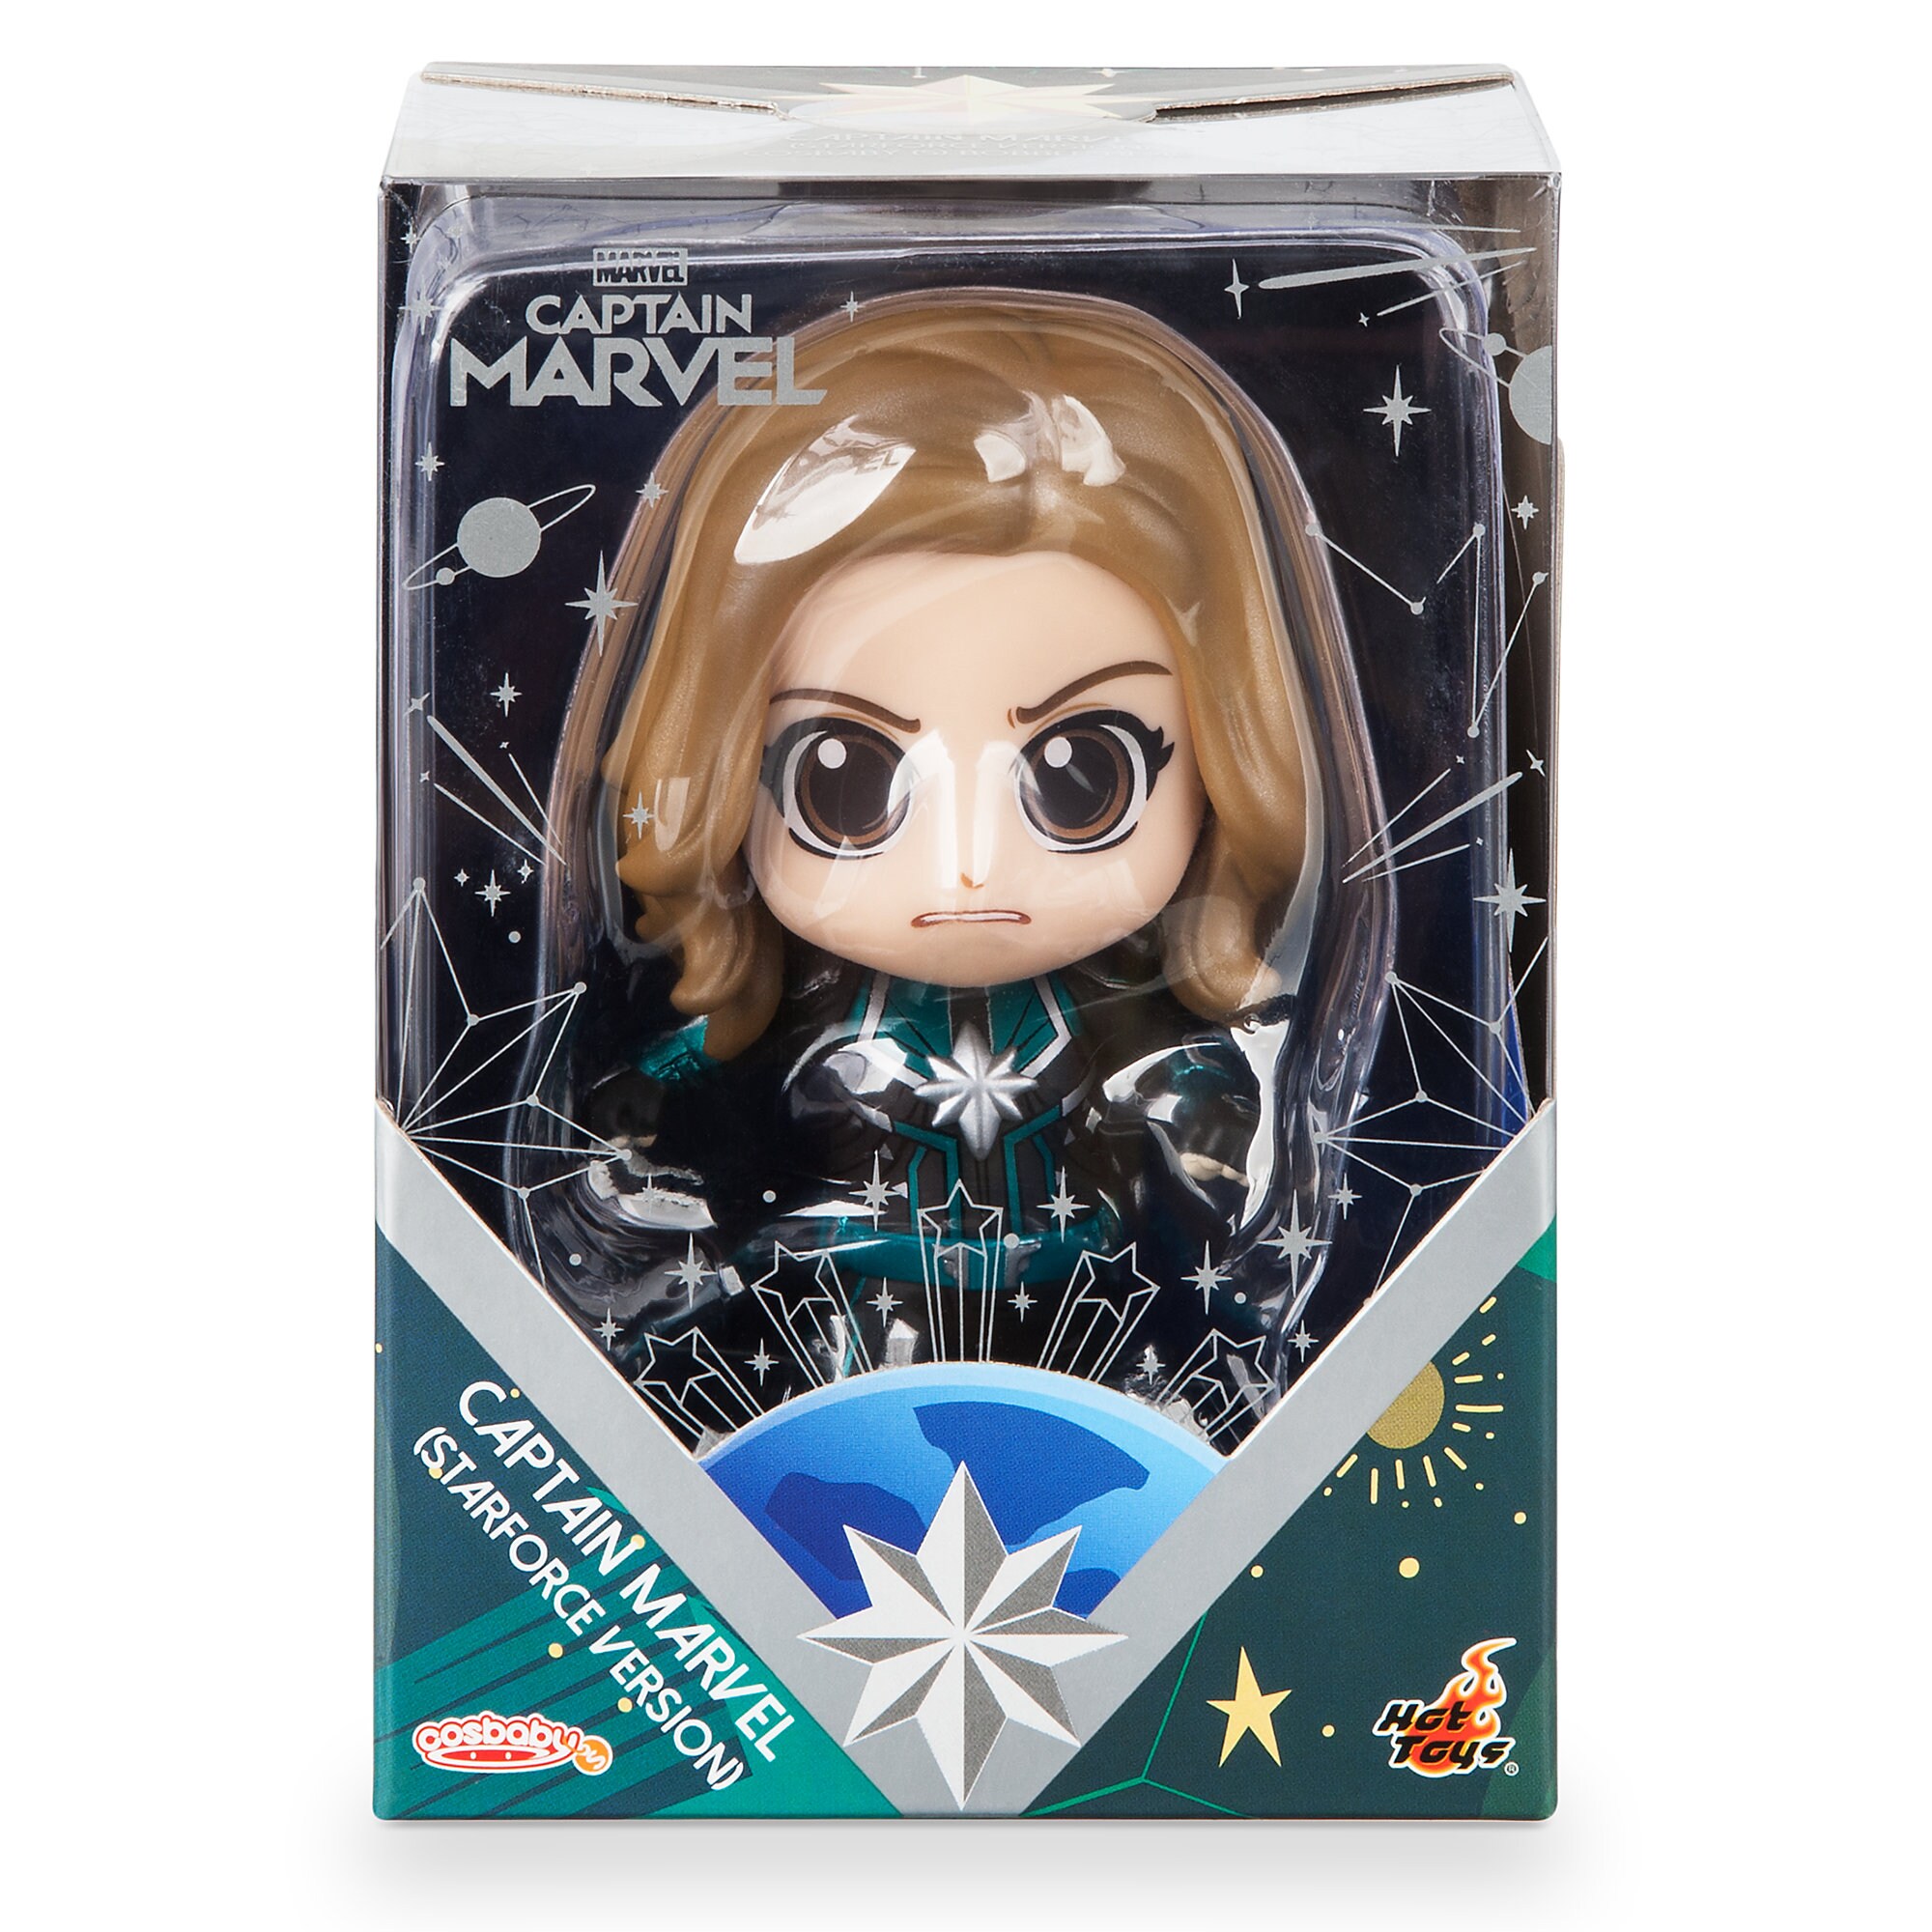 Marvel's Captain Marvel Cosbaby Bobble-Head Figure by Hot Toys - Starforce Version